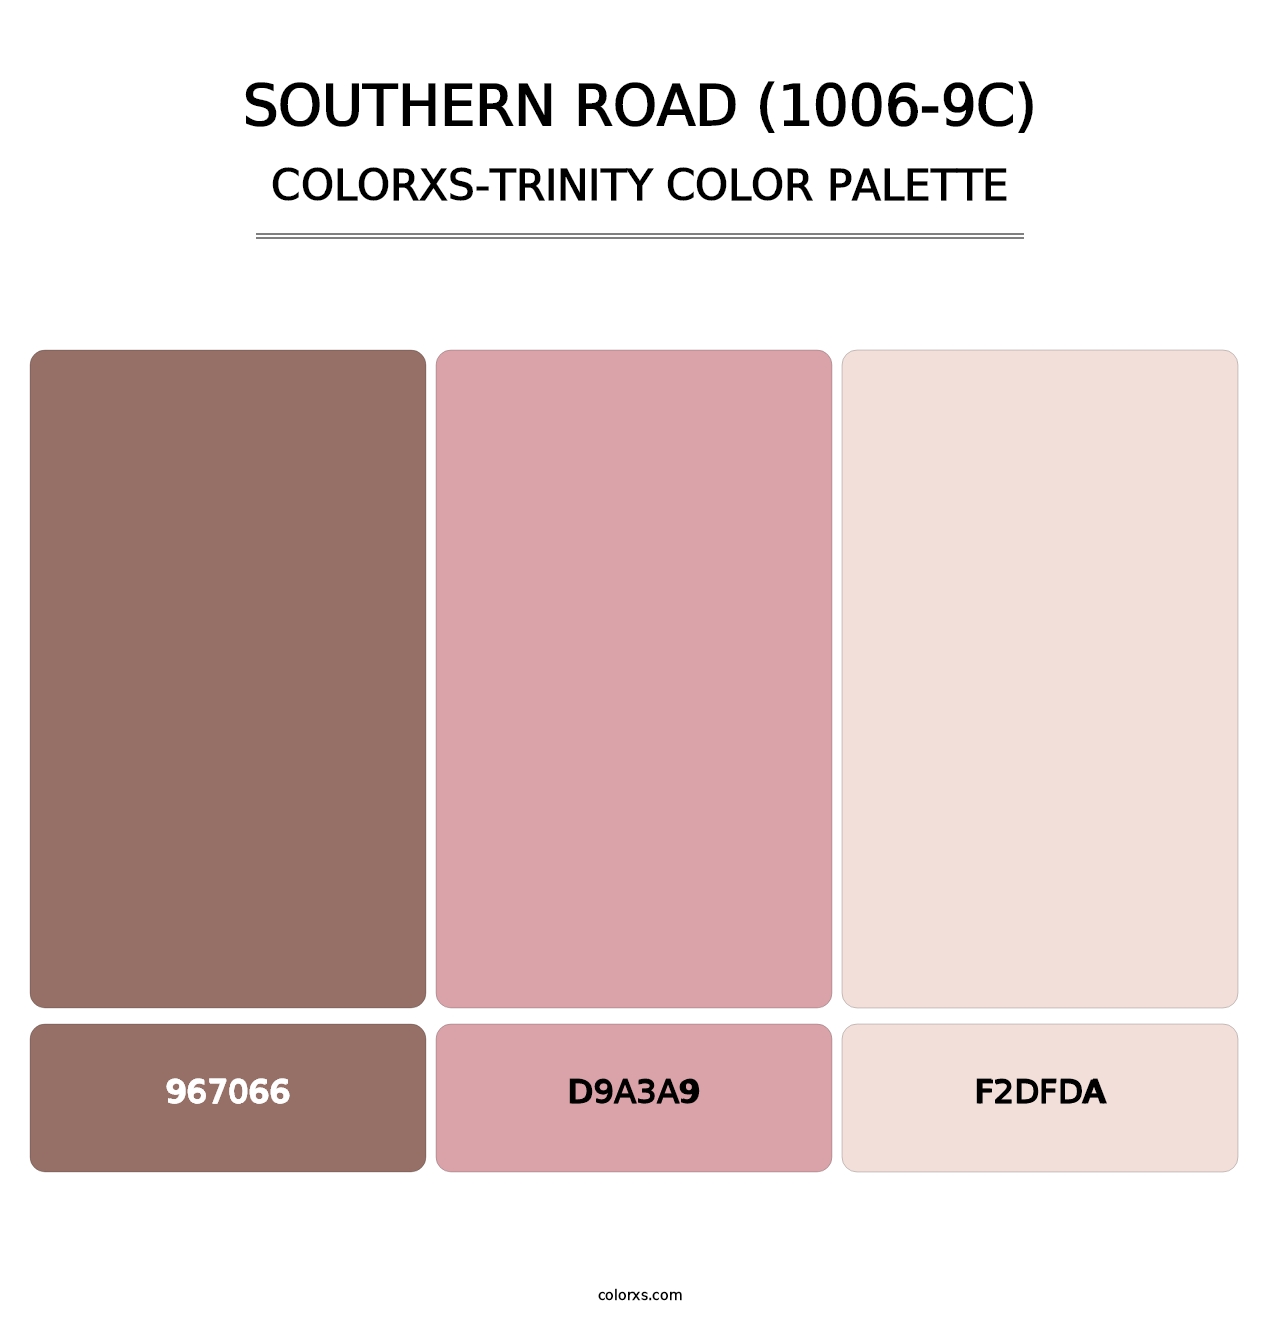 Southern Road (1006-9C) - Colorxs Trinity Palette